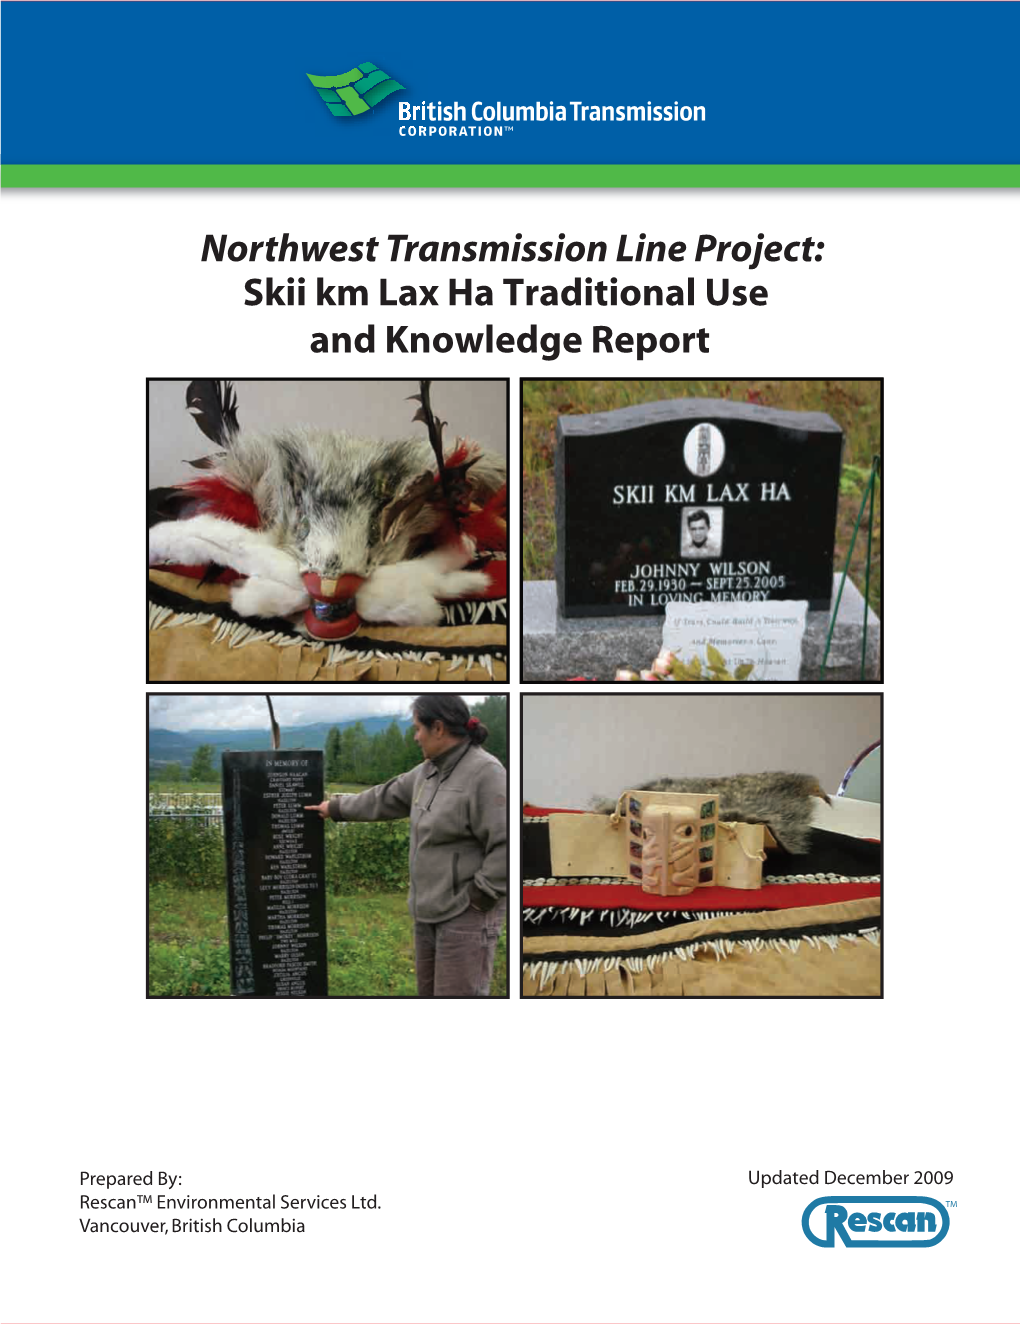 Northwest Transmission Line Project: Skii Km Lax Ha Traditional Use and Knowledge Report